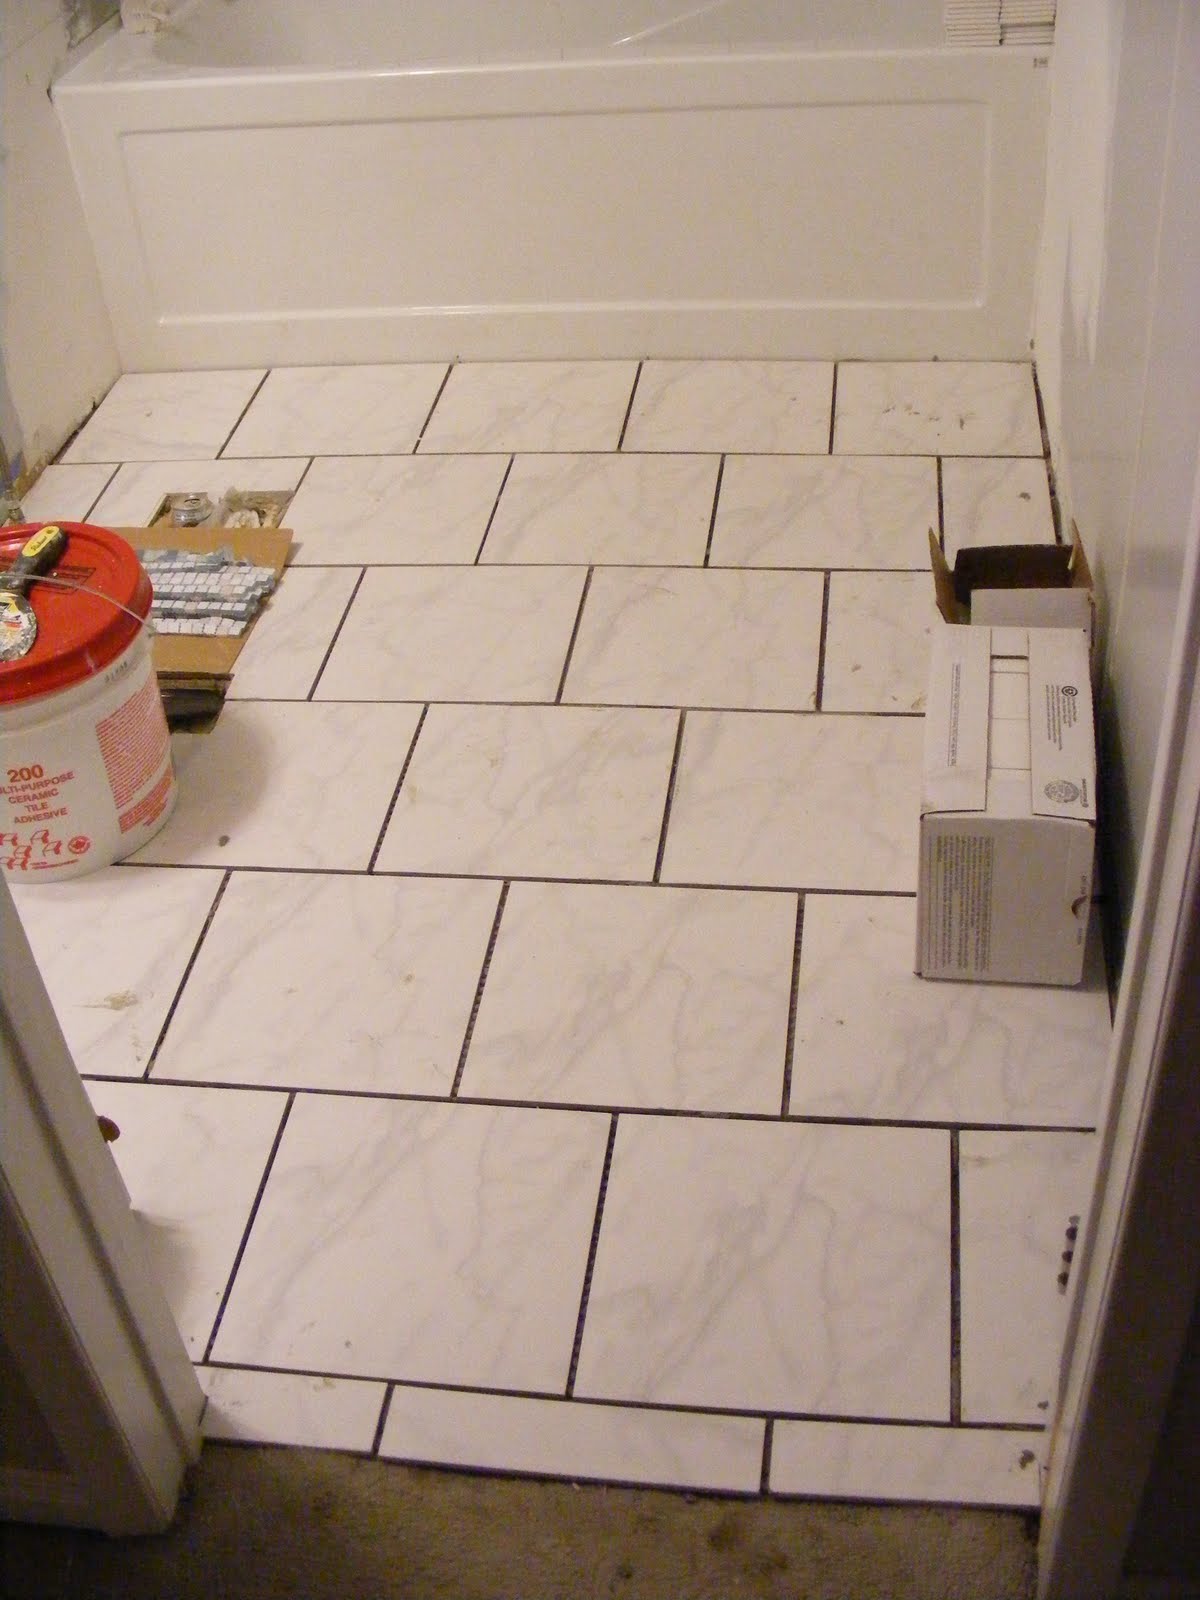 bathroom tile flooring But as beautiful as the floor is, the real piece de resistance is 